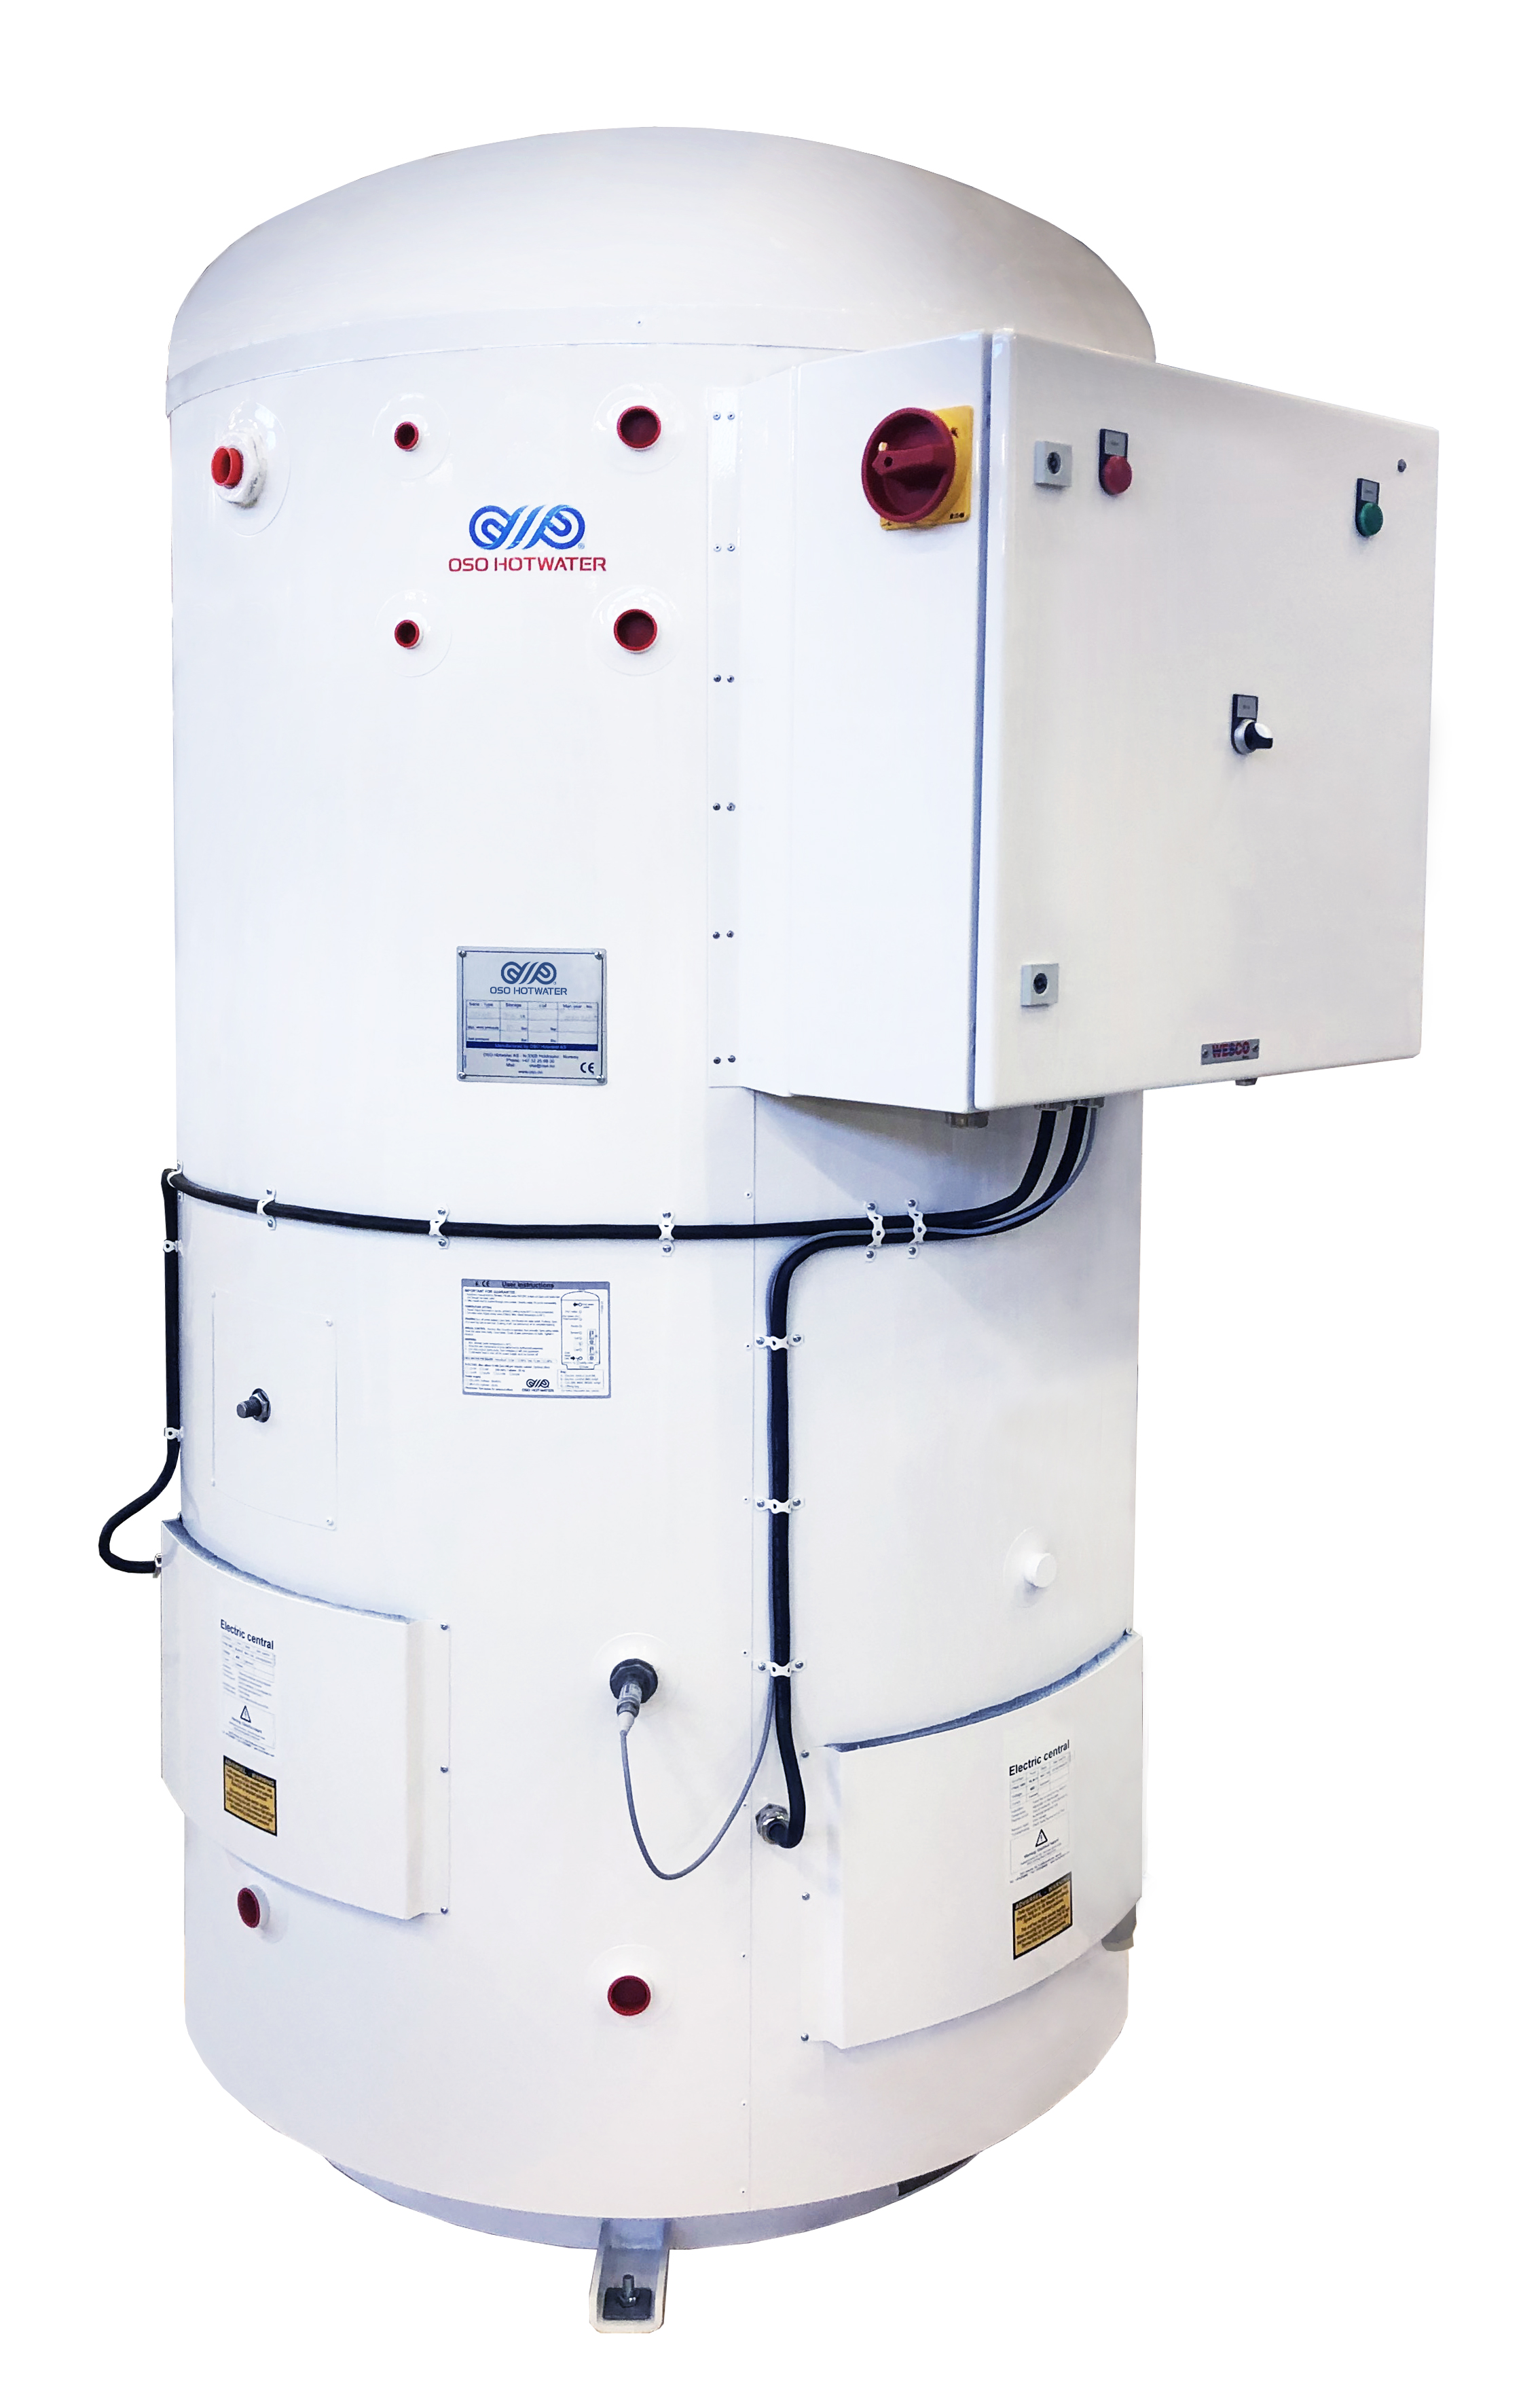 Oso Hotwater Export AS Photo